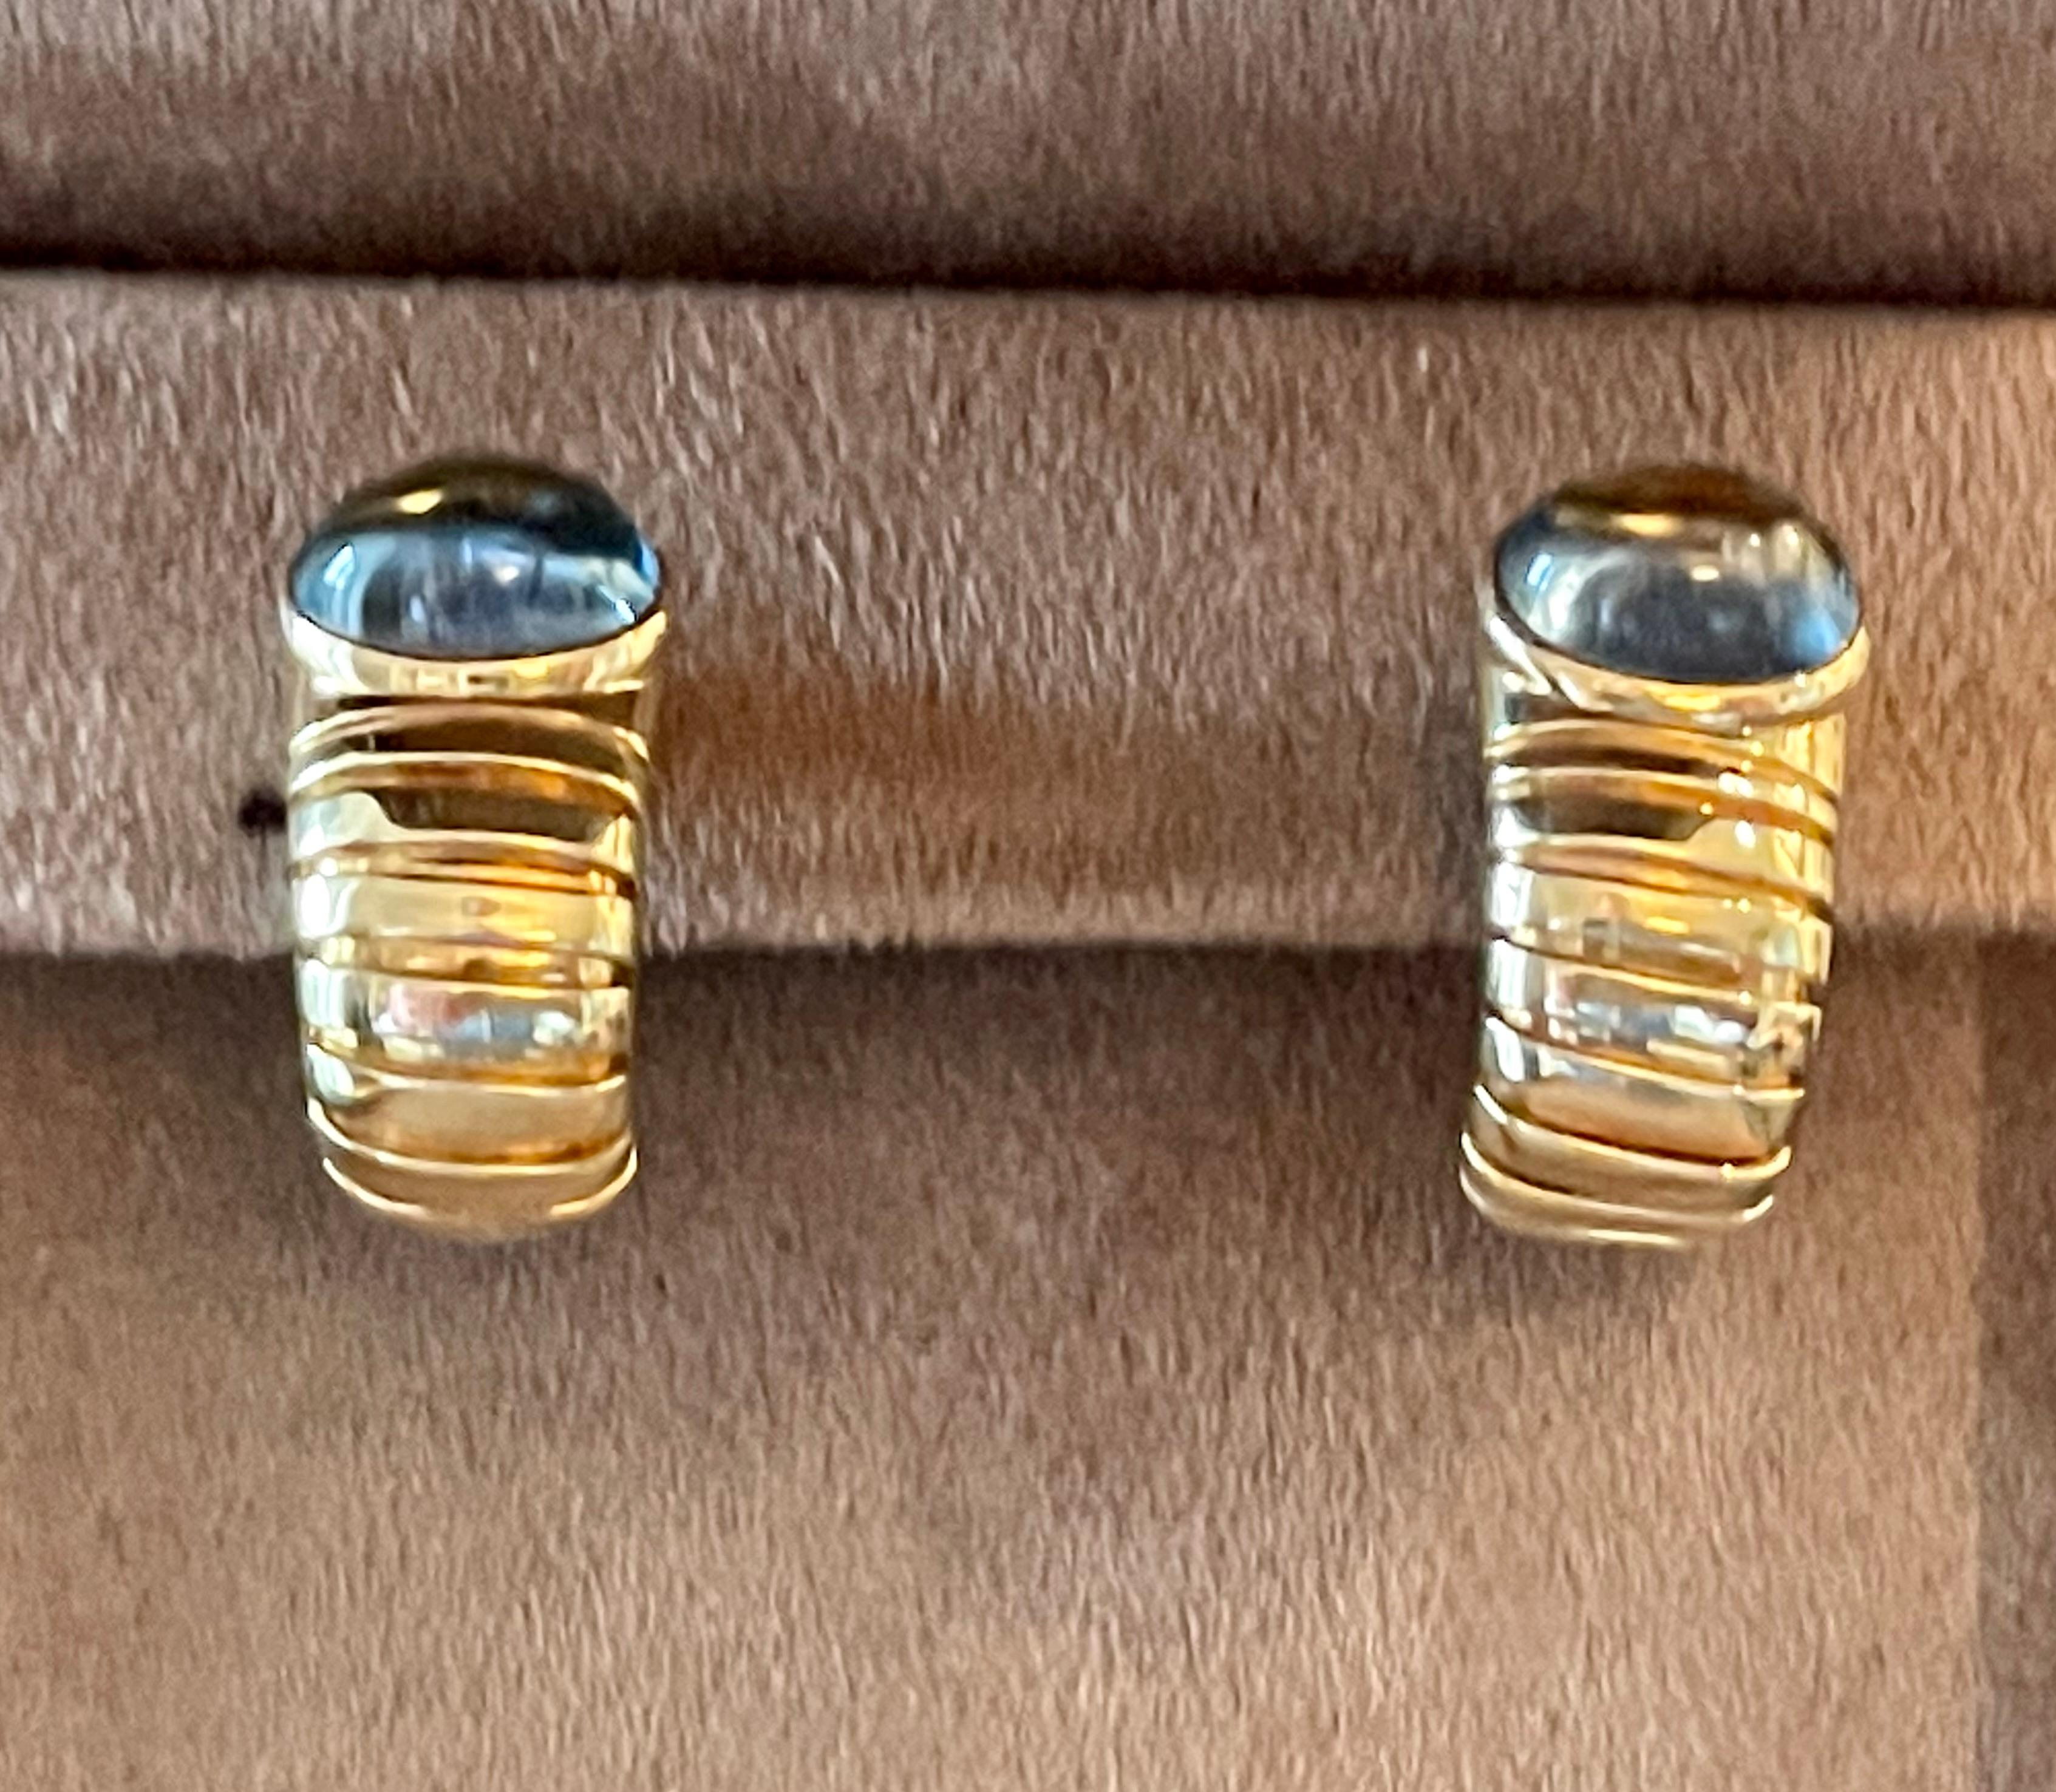 An iconic set of 18 K yellow Gold earclips showcasing 2blue Topaz Cabochons. 2.0 cm height and 1.5 cm wide. 23 grams. Stamped 750 with Italian assay marks for 18 karat gold
Fully signed Bvlgari, Made in Italy
QUESTIONS?  Contact us right away if you